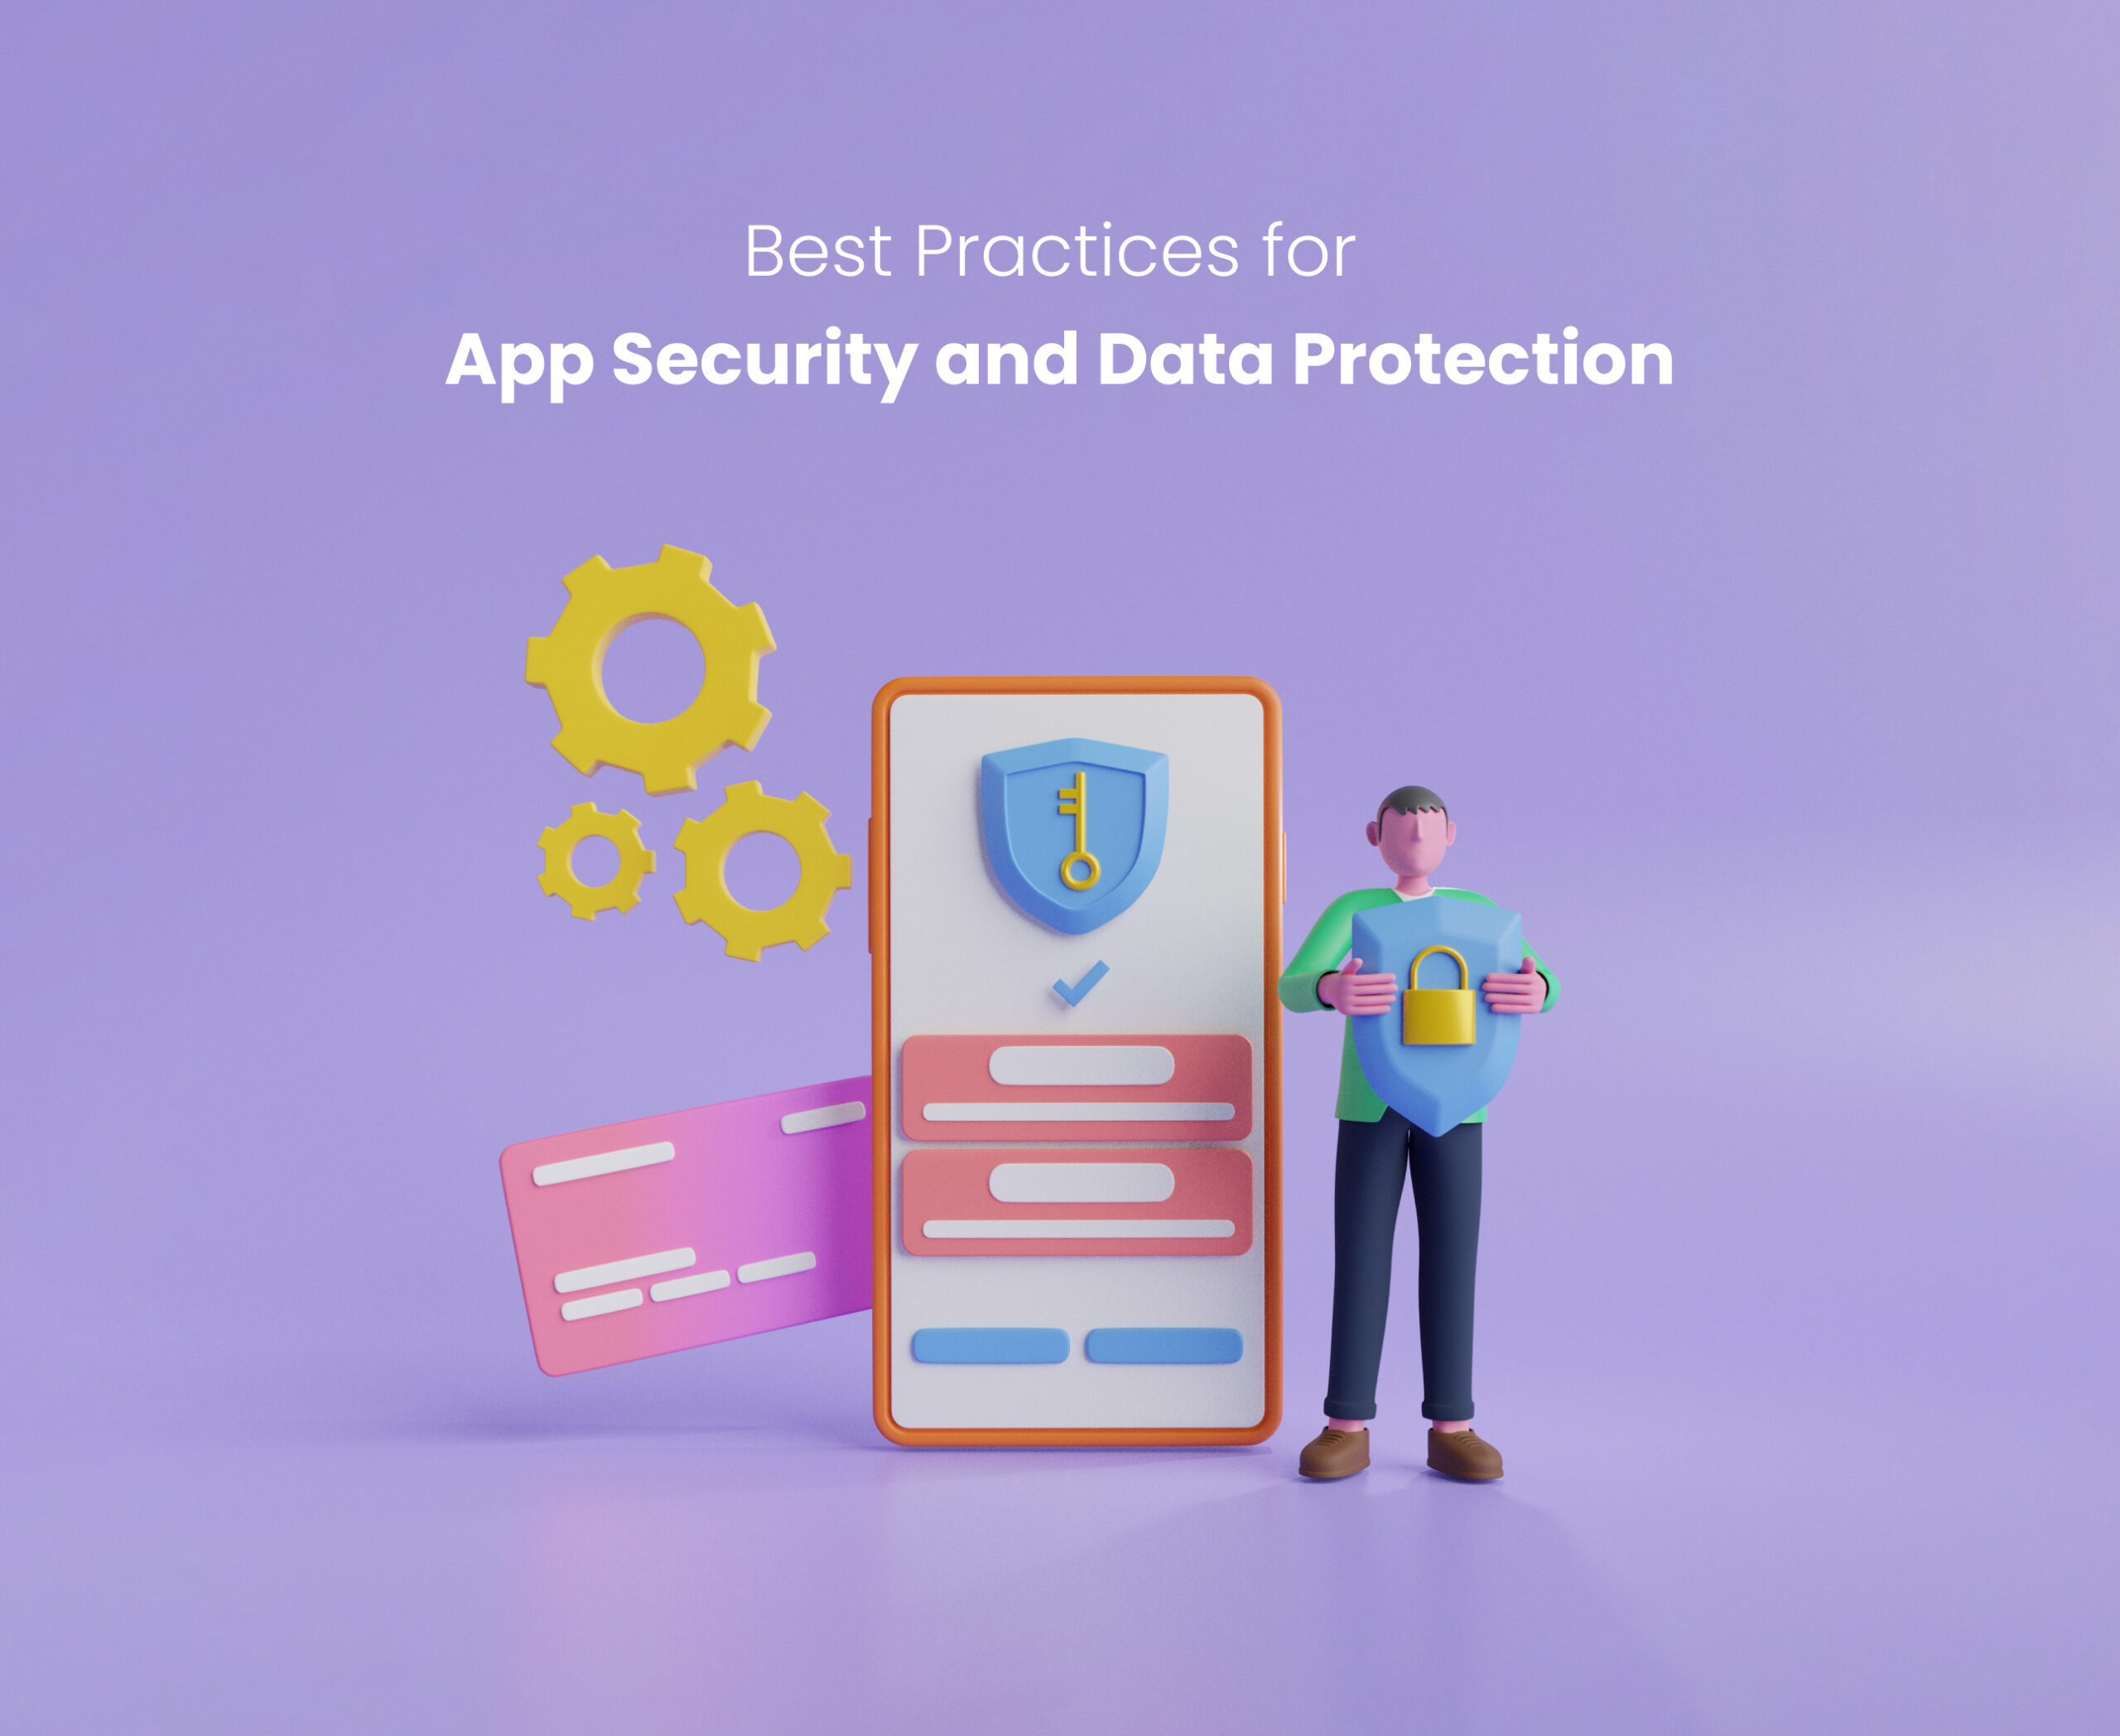 Practices for App Security and Data Protection